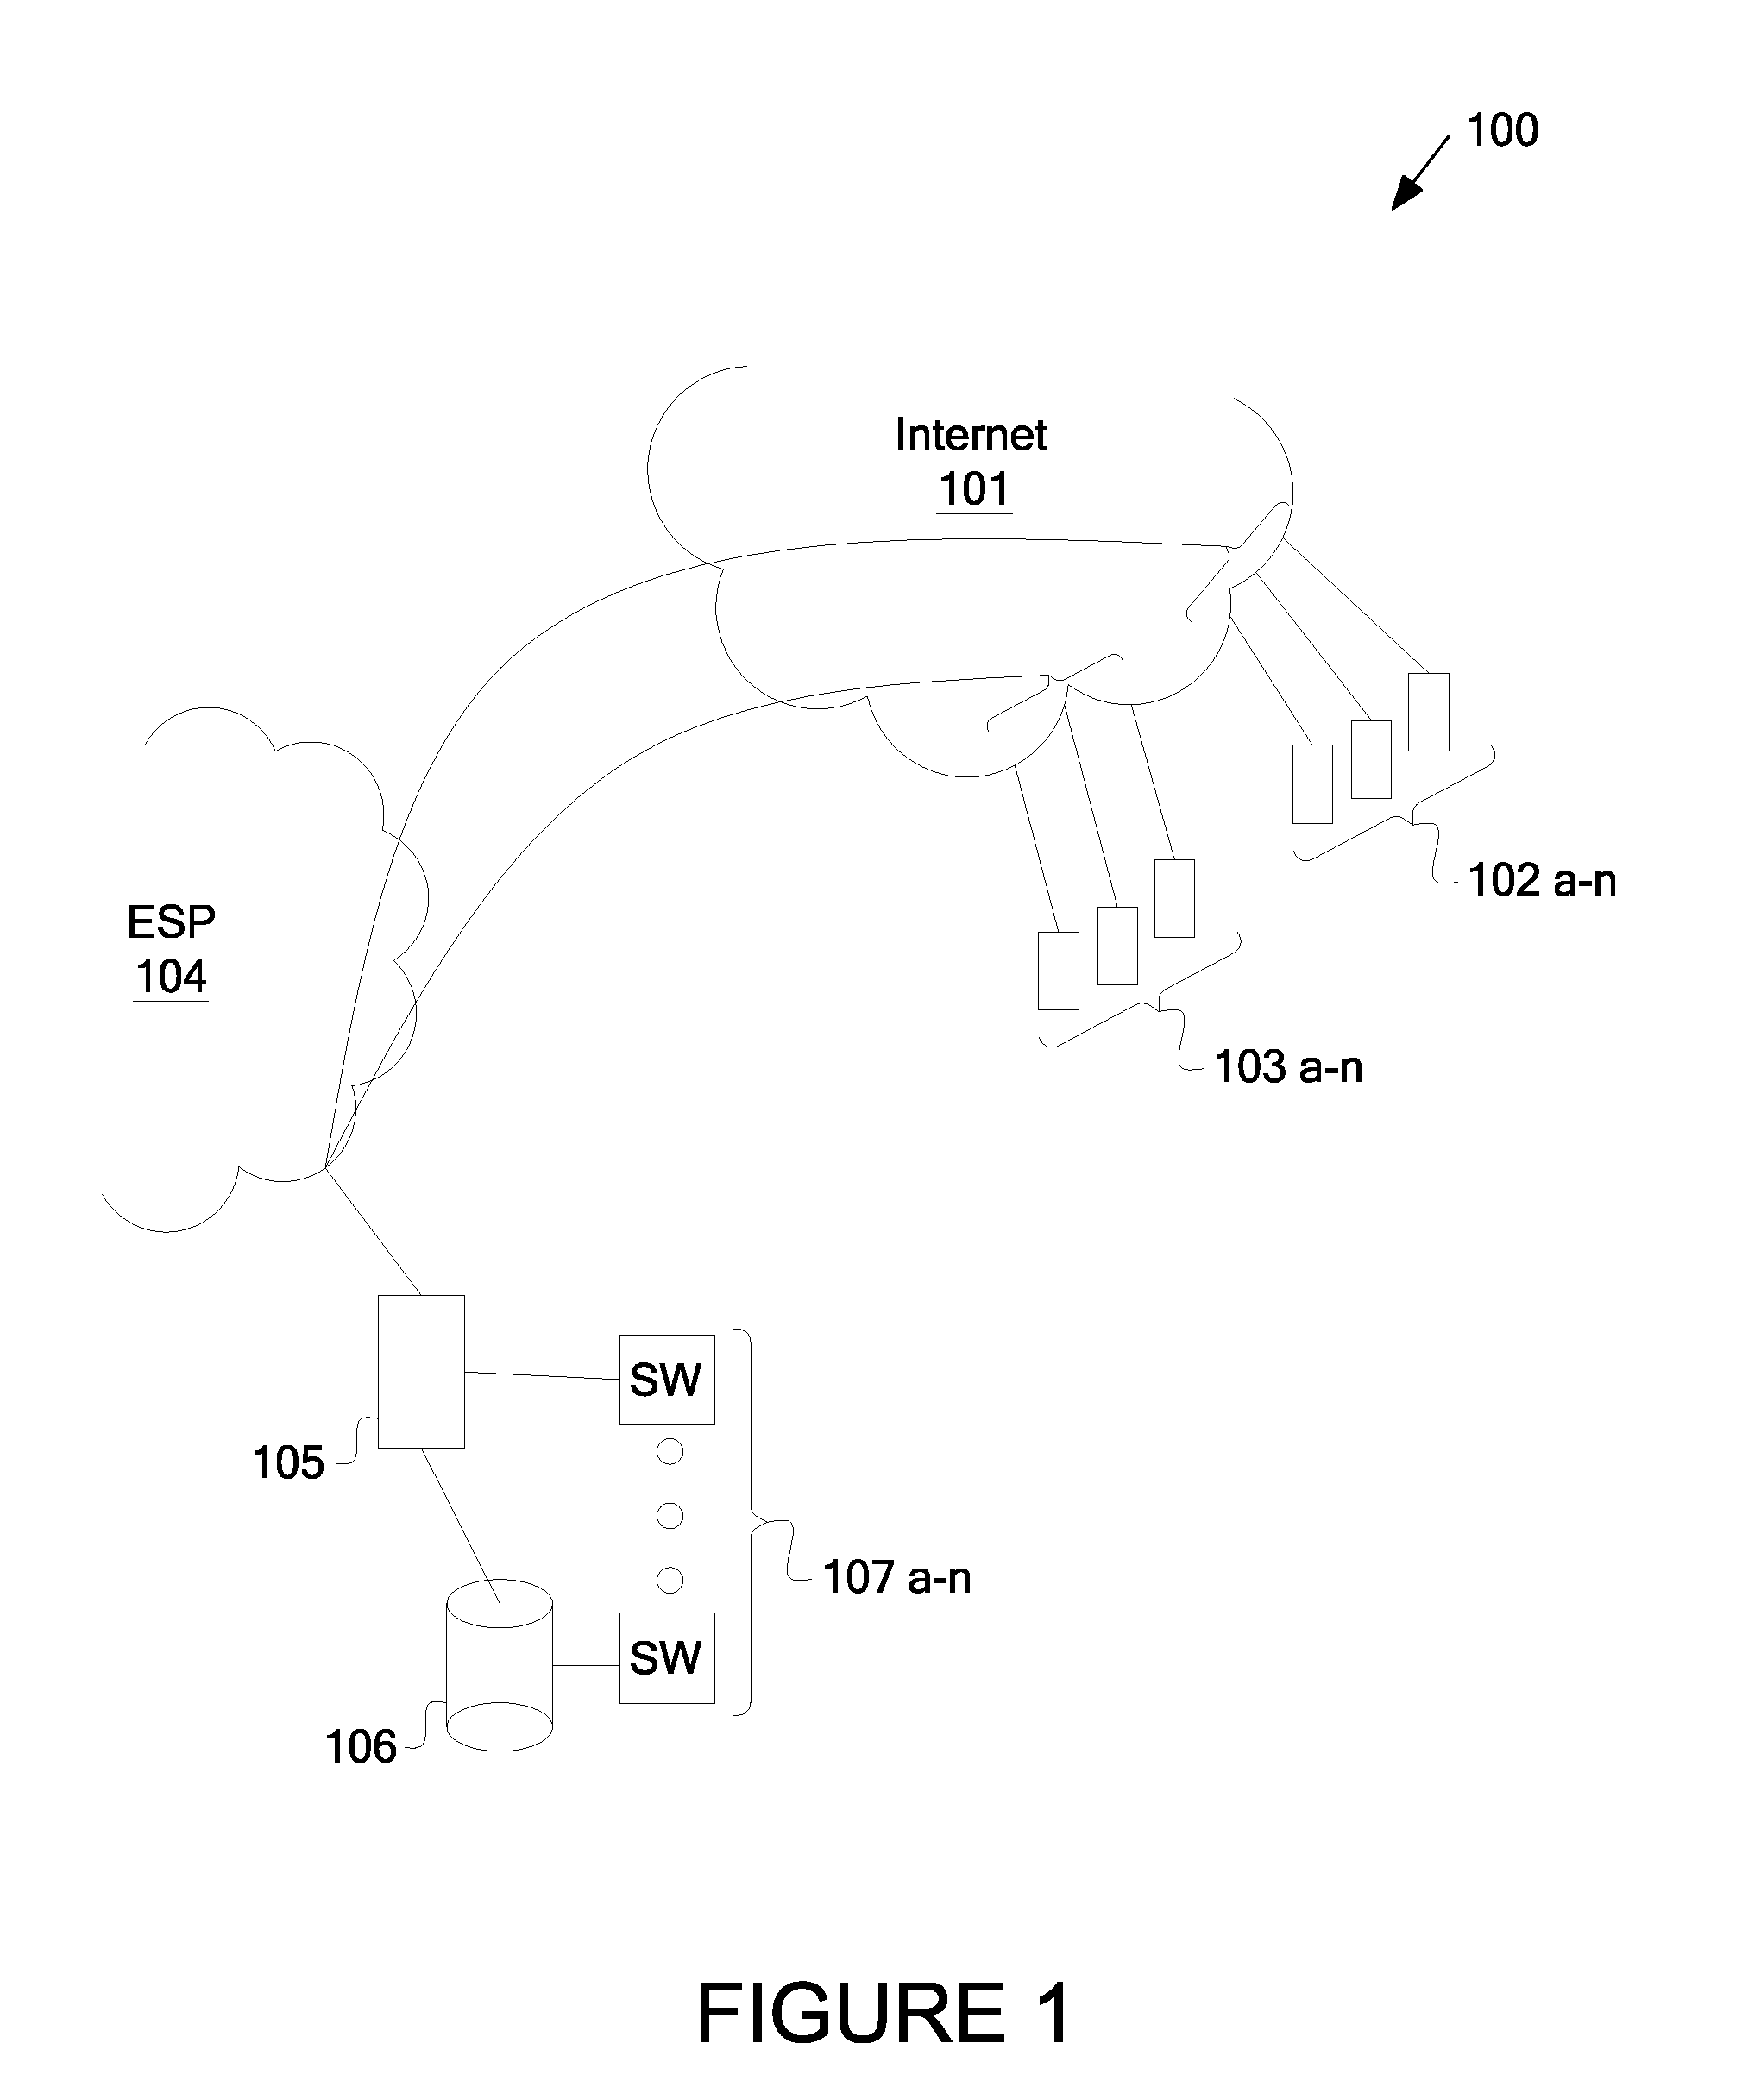 System and Method for Providing Travel Schedule of Contacts